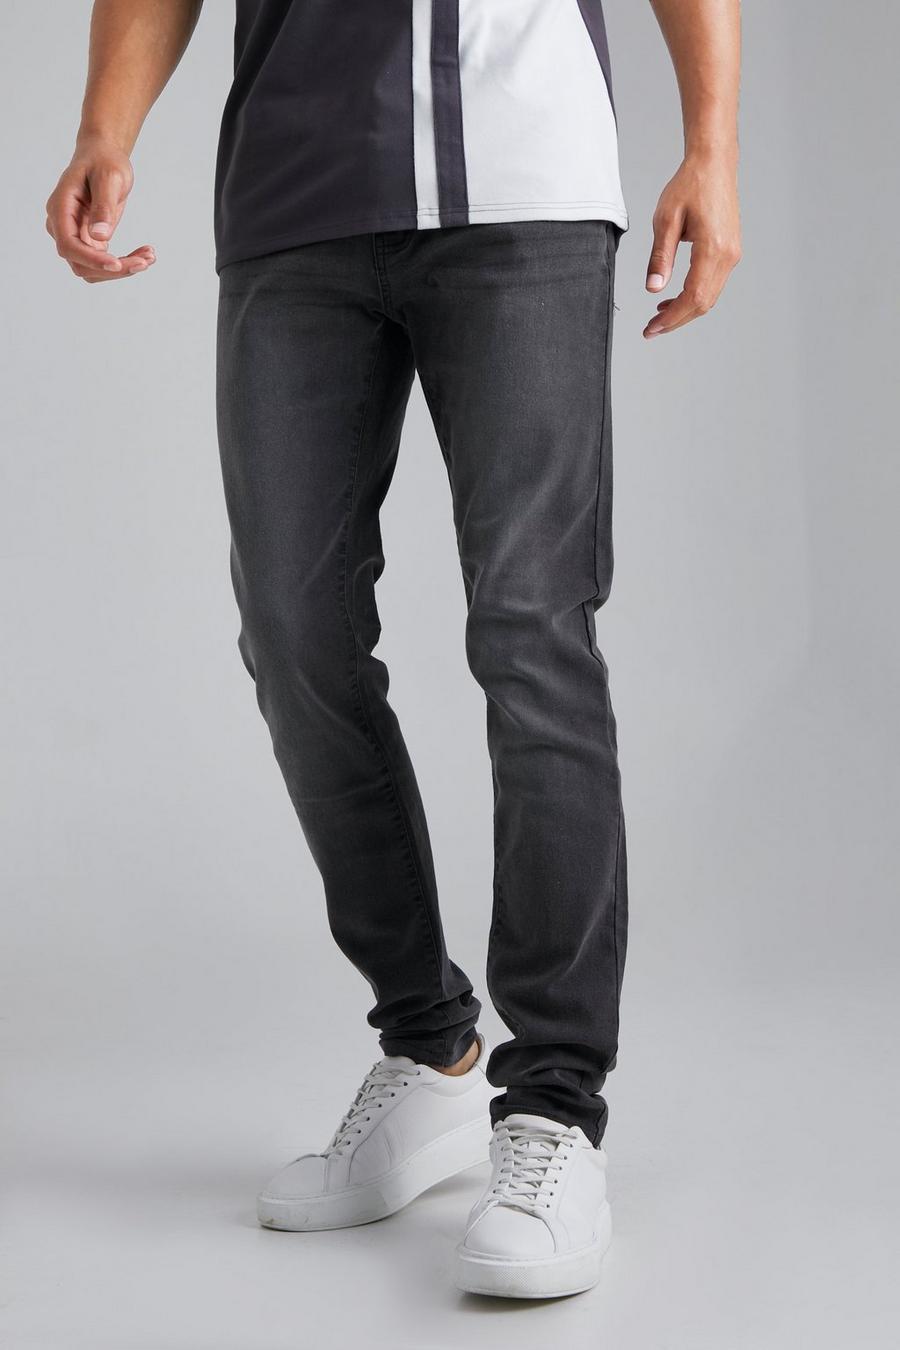 Charcoal gris Tall Stretch Skinny Jeans